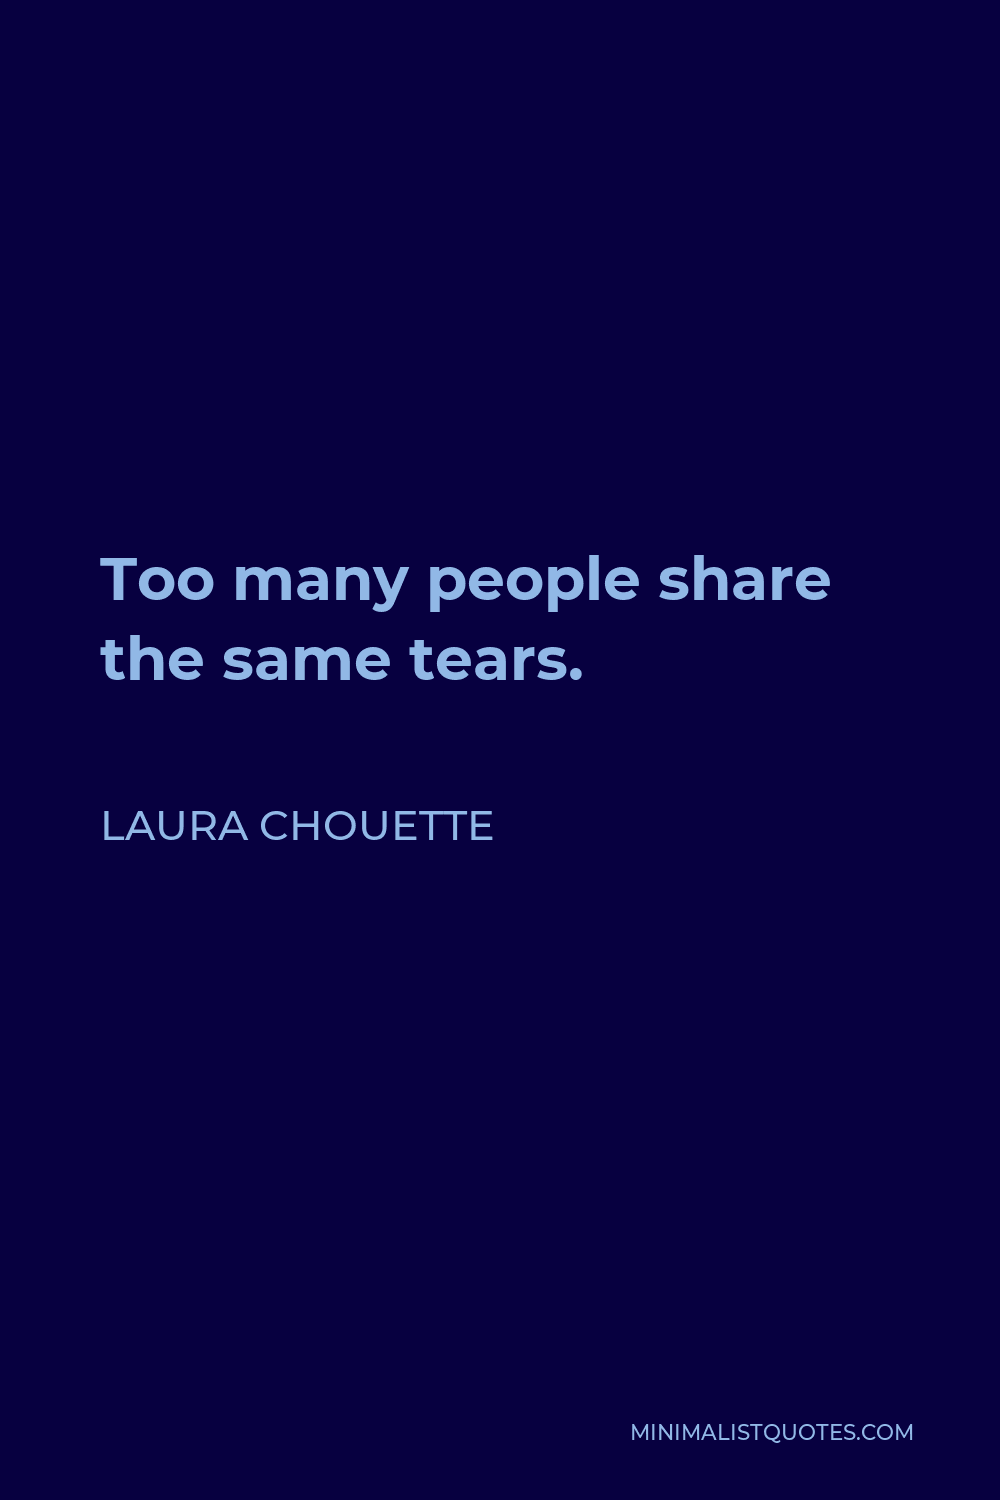 Laura Chouette Quote - Too many people share the same tears.